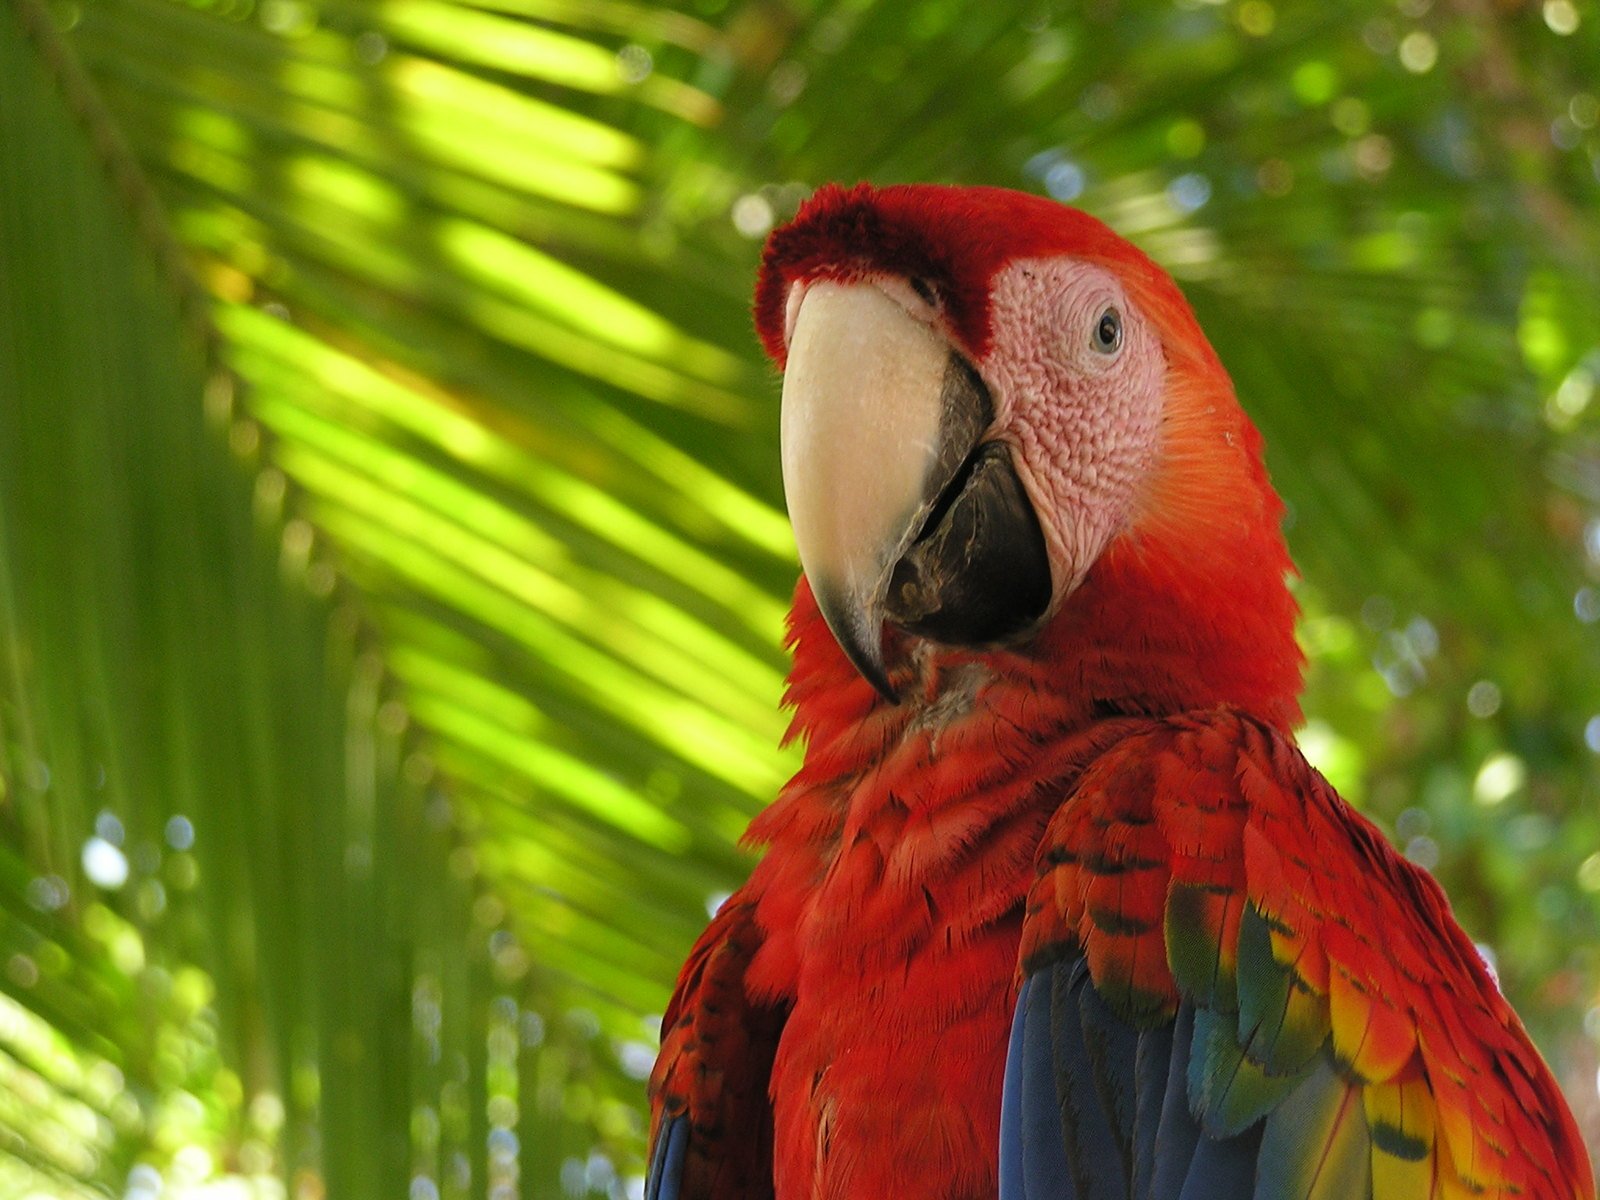 a bird with red feathers perched next to palm trees